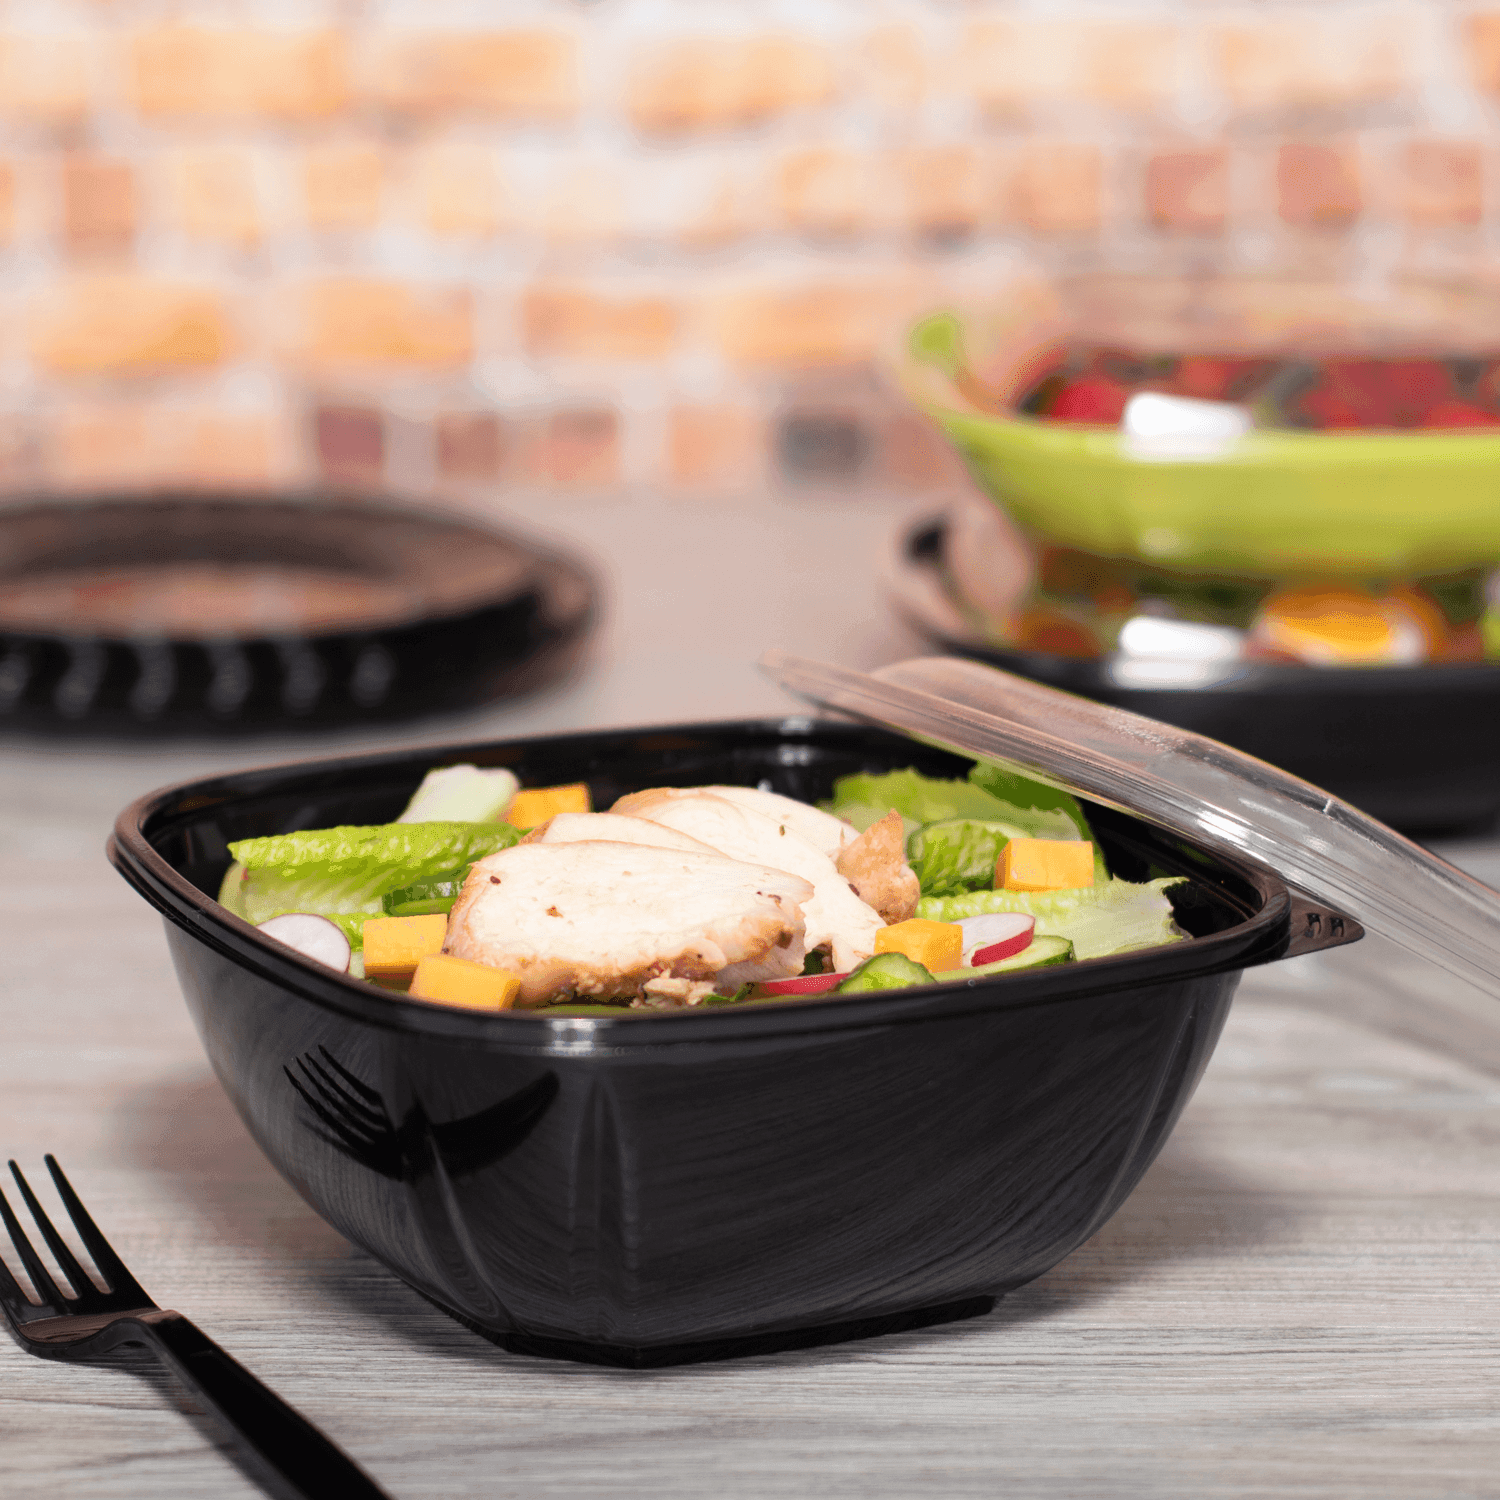 Black Karat 48oz PET Square Bowl with salad and grilled chicken